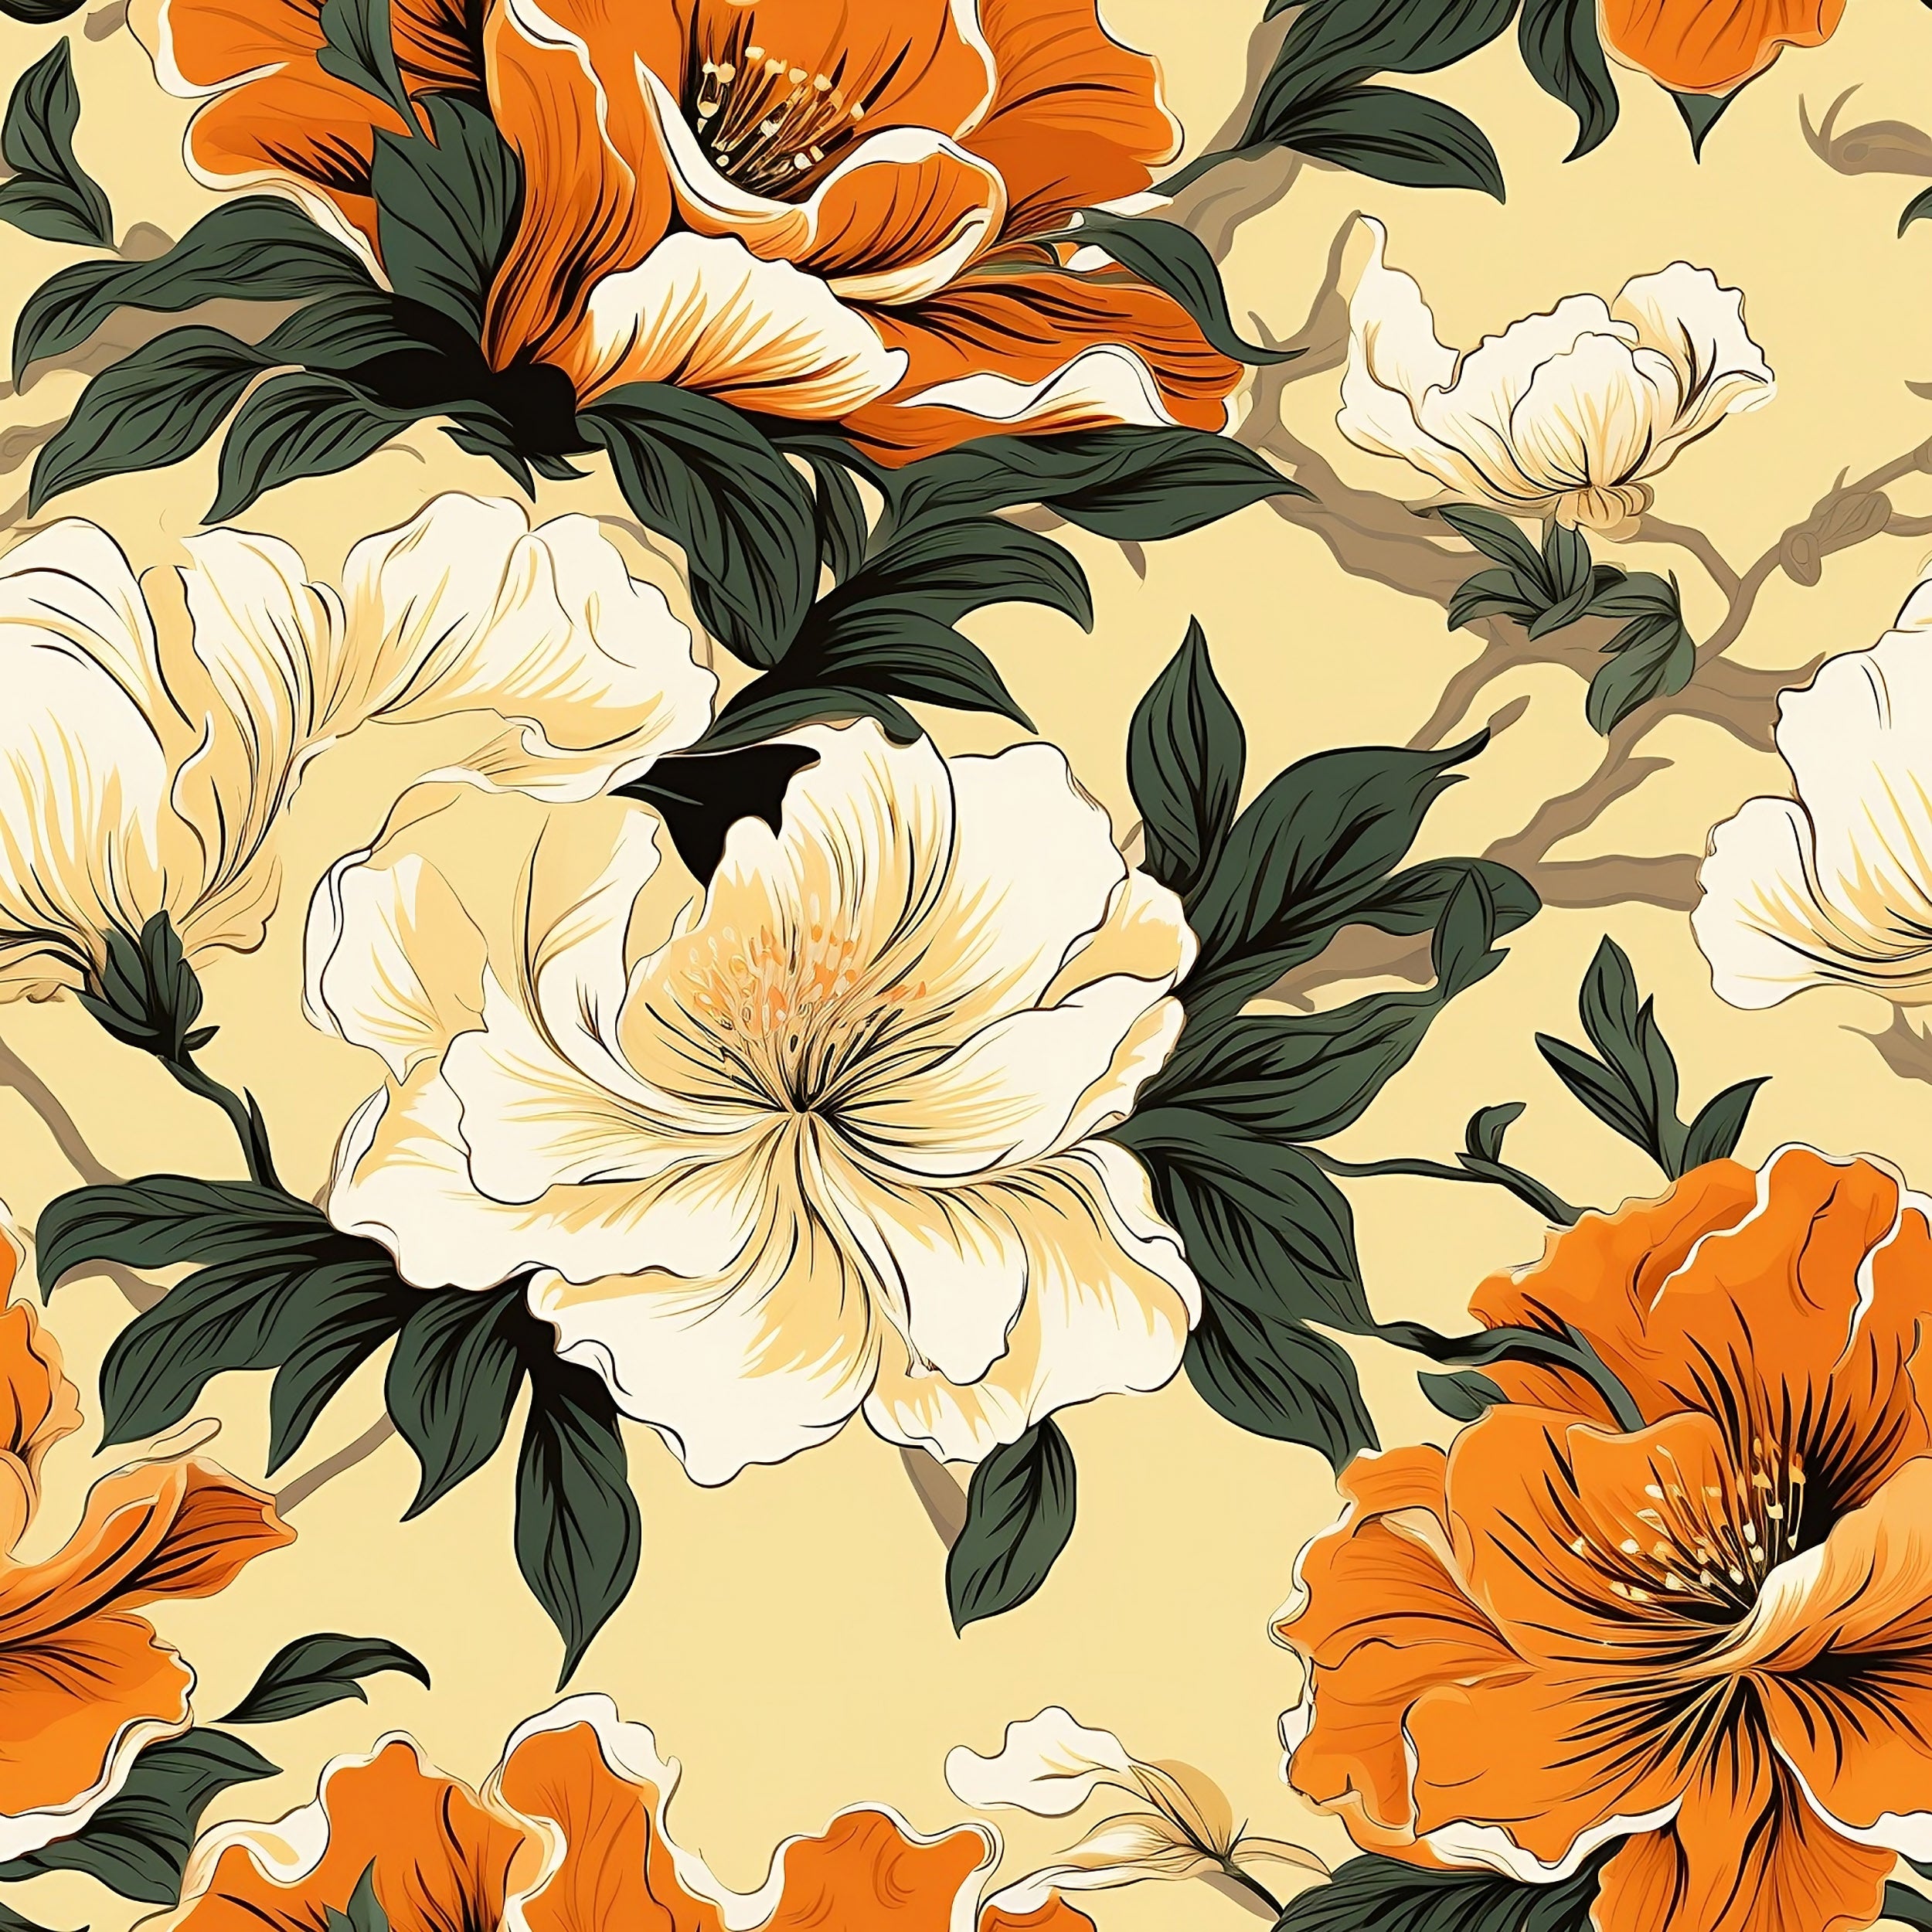 Flowers on Beige Background Close-Up